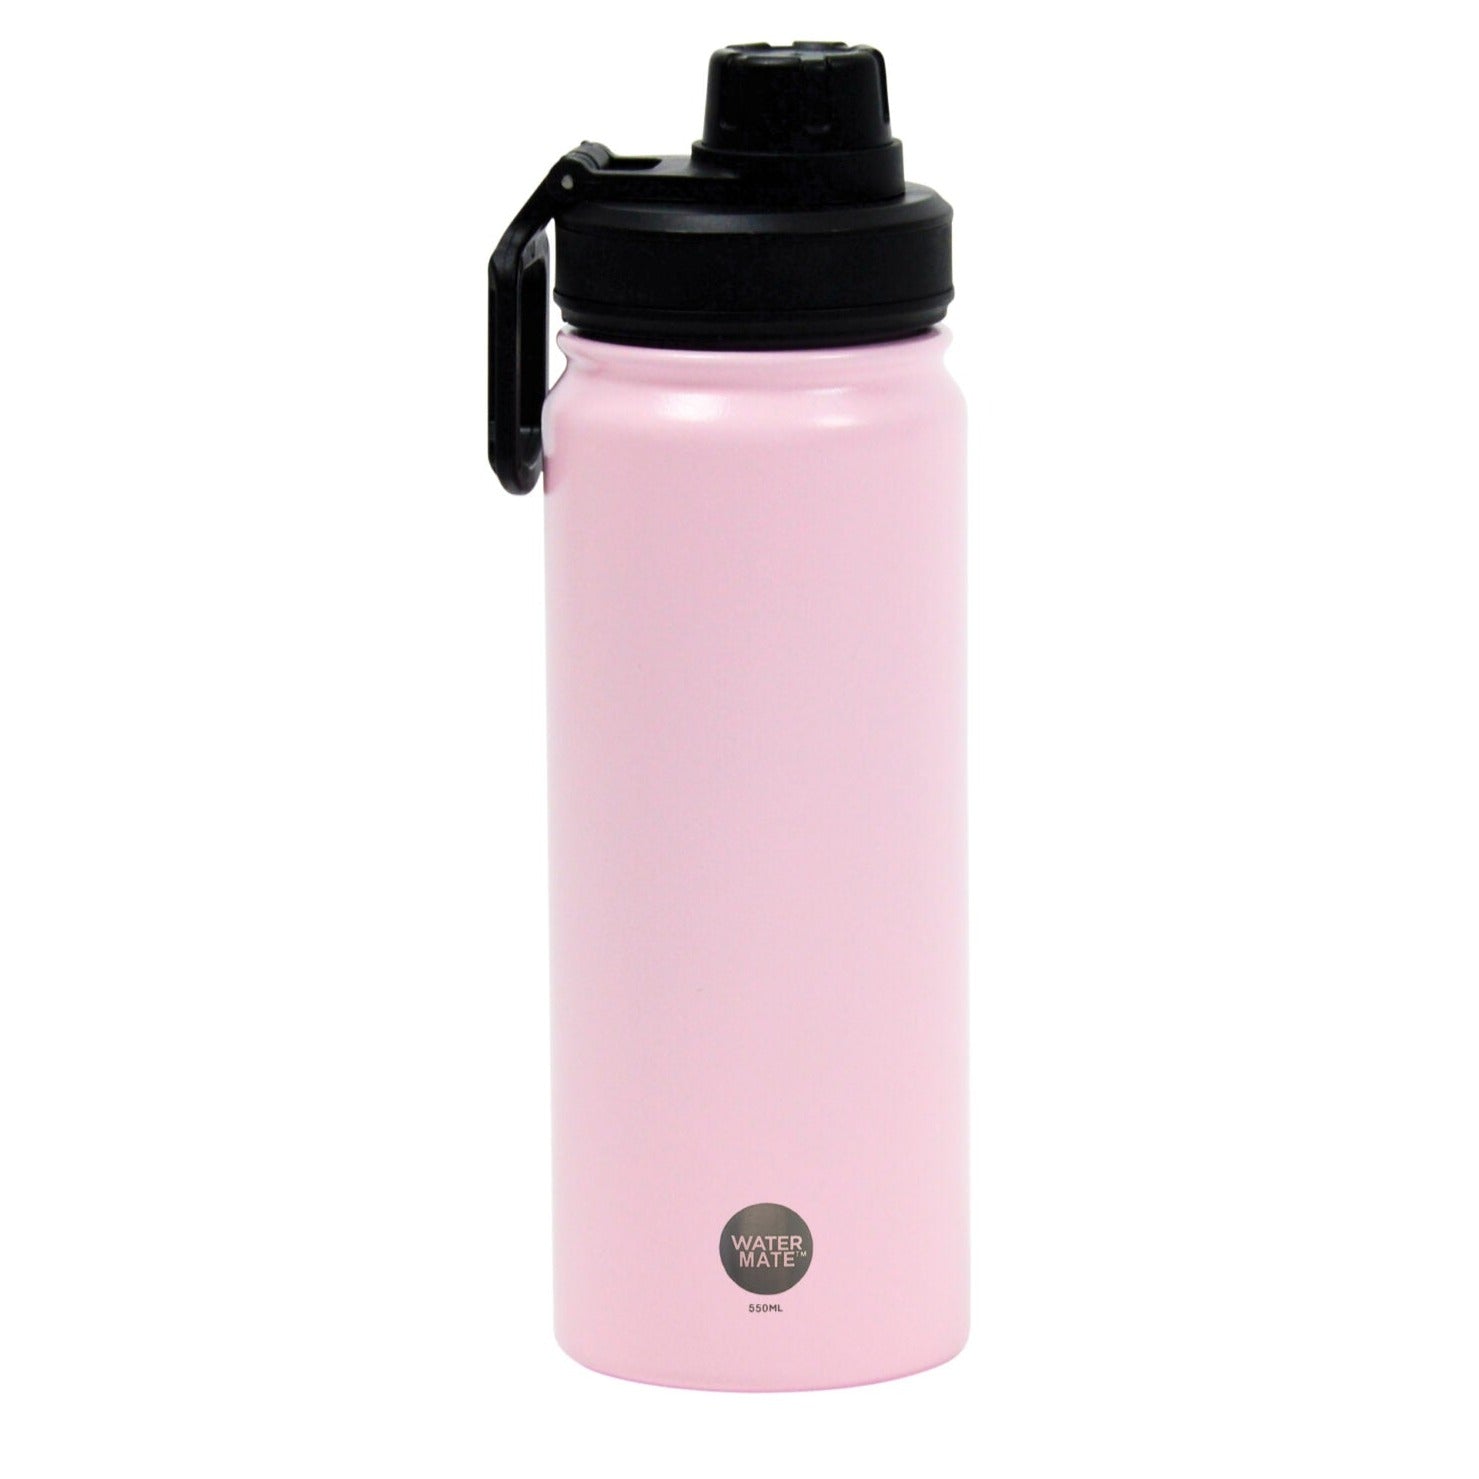 Annabel Trends Watermate Double Wall Stainless Steel Water Bottle Pale Pink 550ml